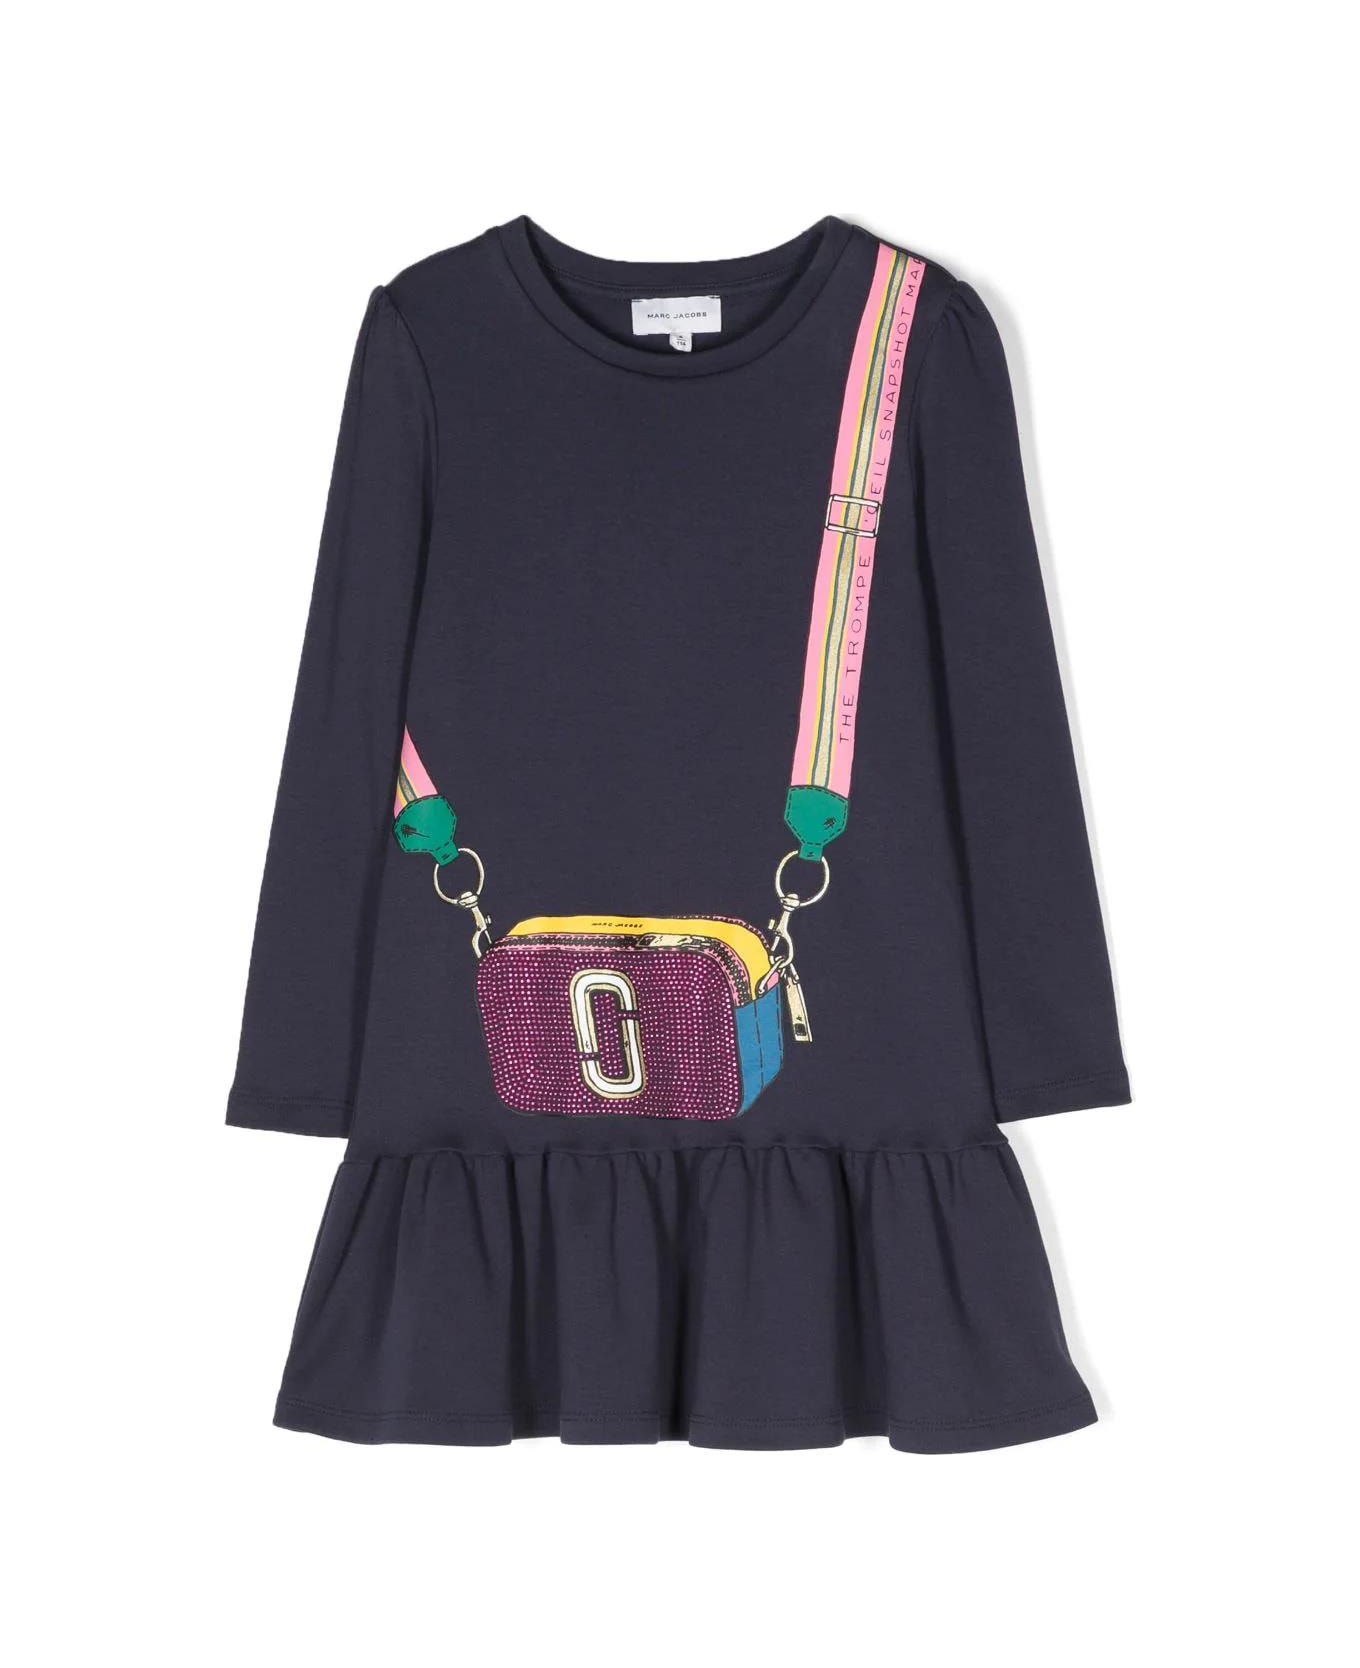 Little Marc Jacobs Marc Jacobs Abito Blu Navy In Jersey Di Cotone Bambina - Blu